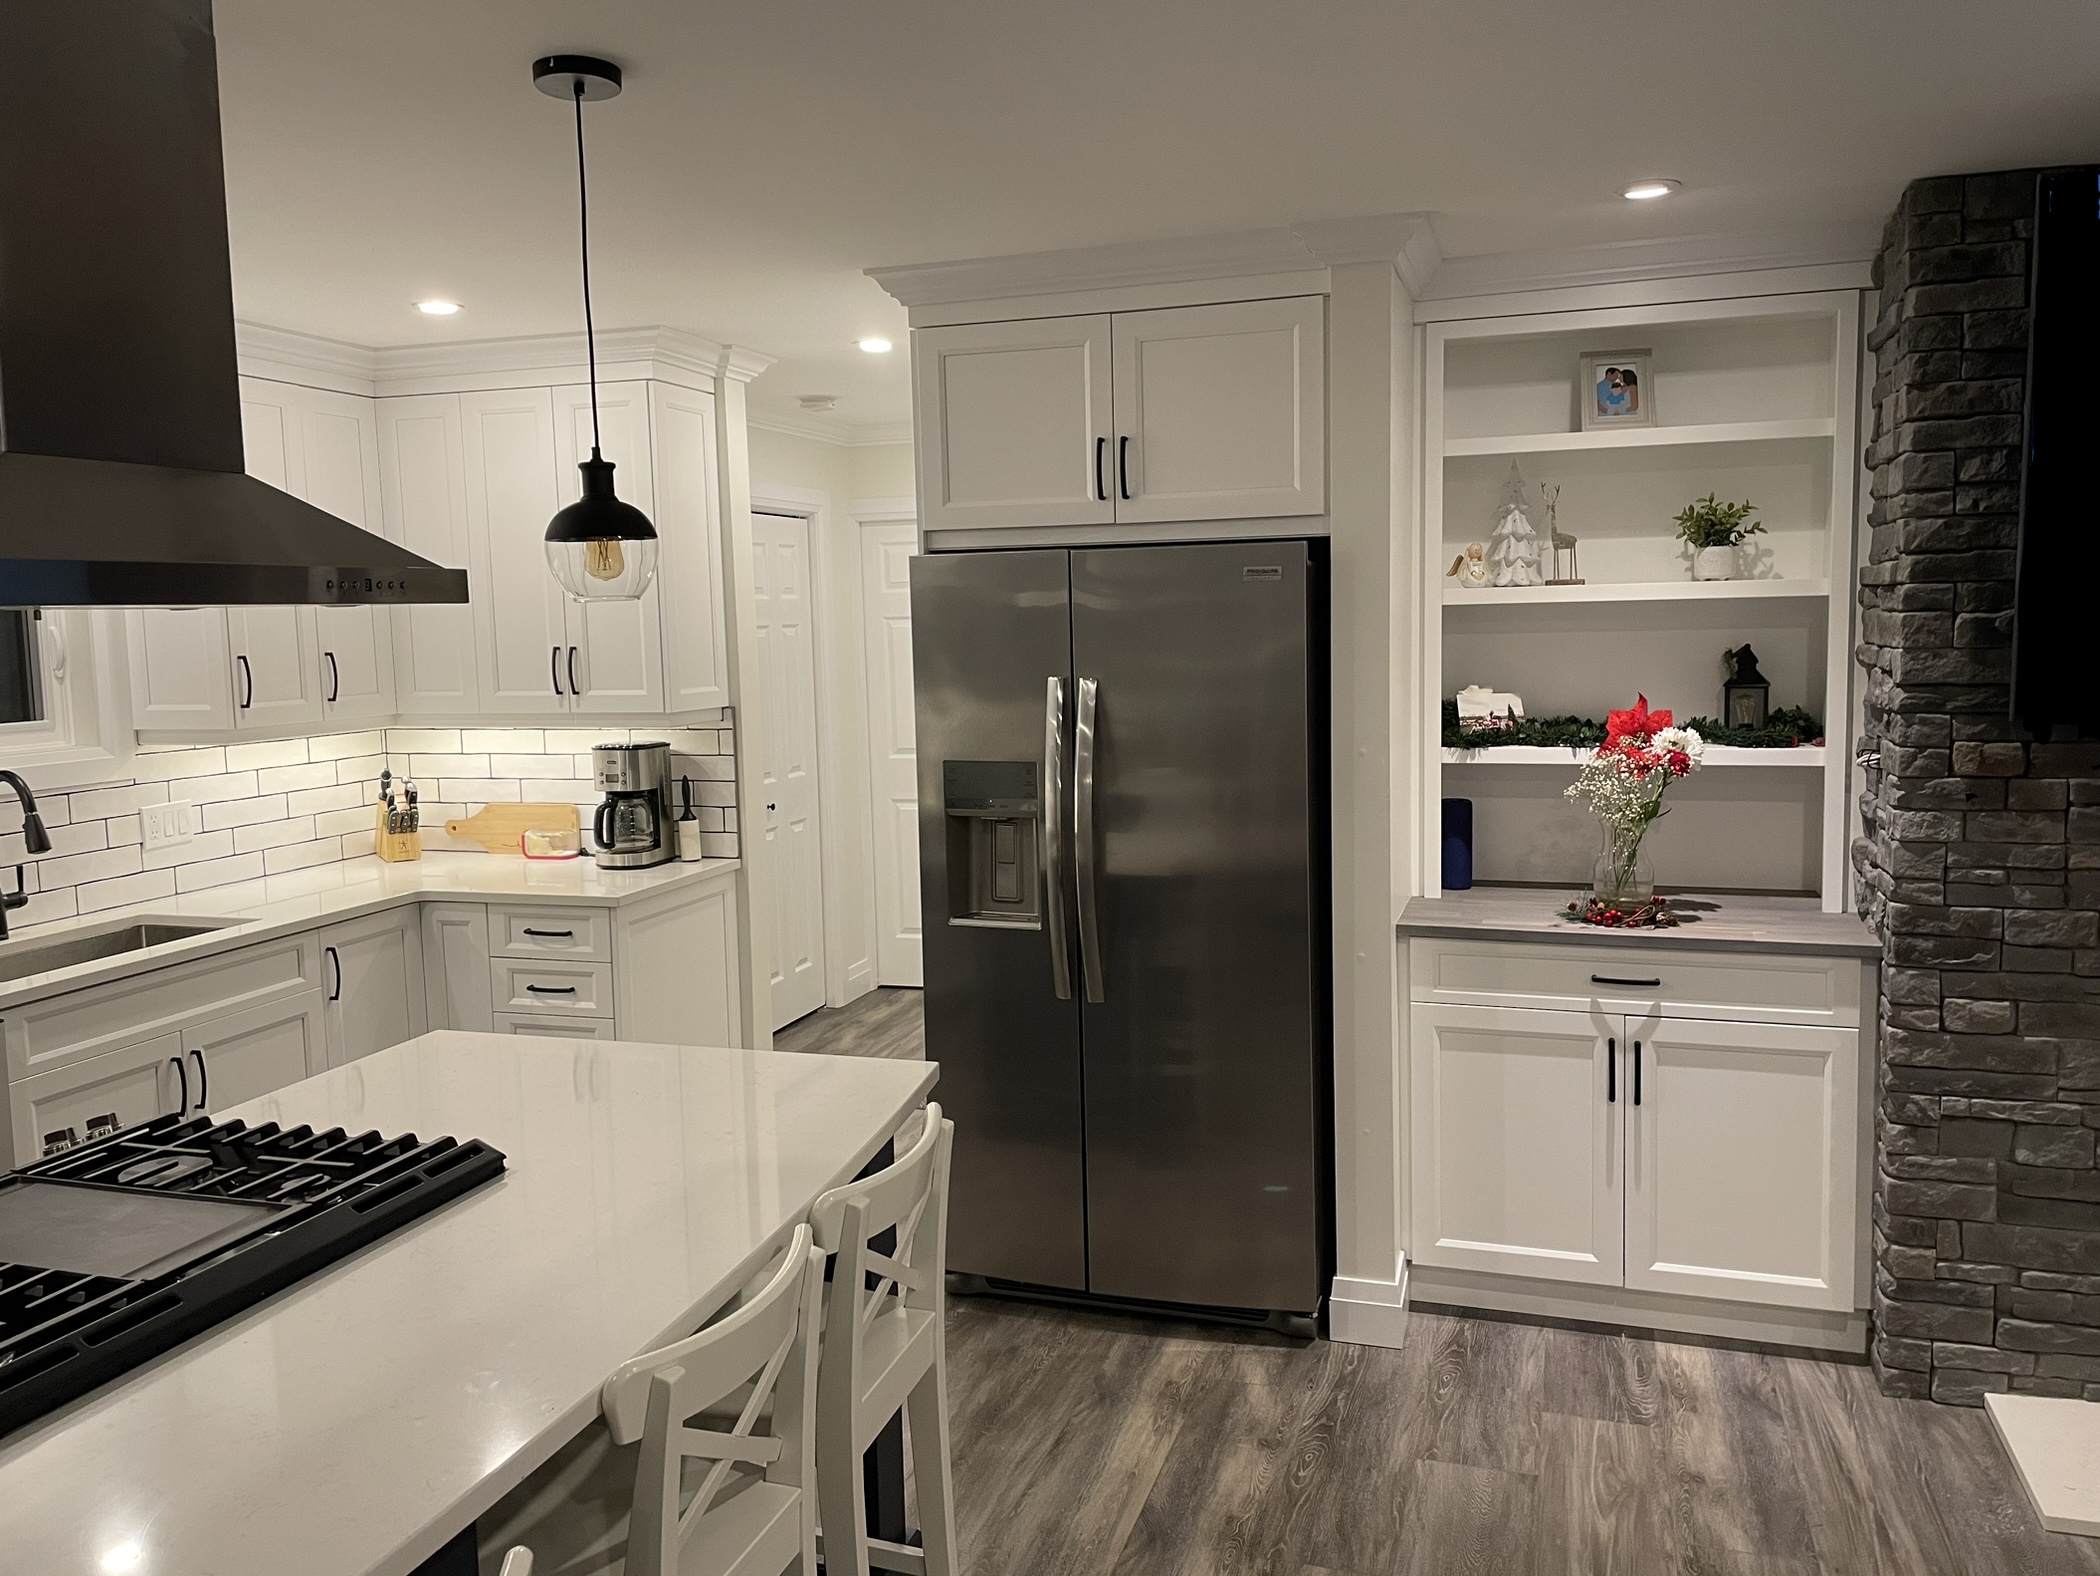 View of fridge and hutch after full kitchen renovation with custom cabinetry by SSP Cabinetry